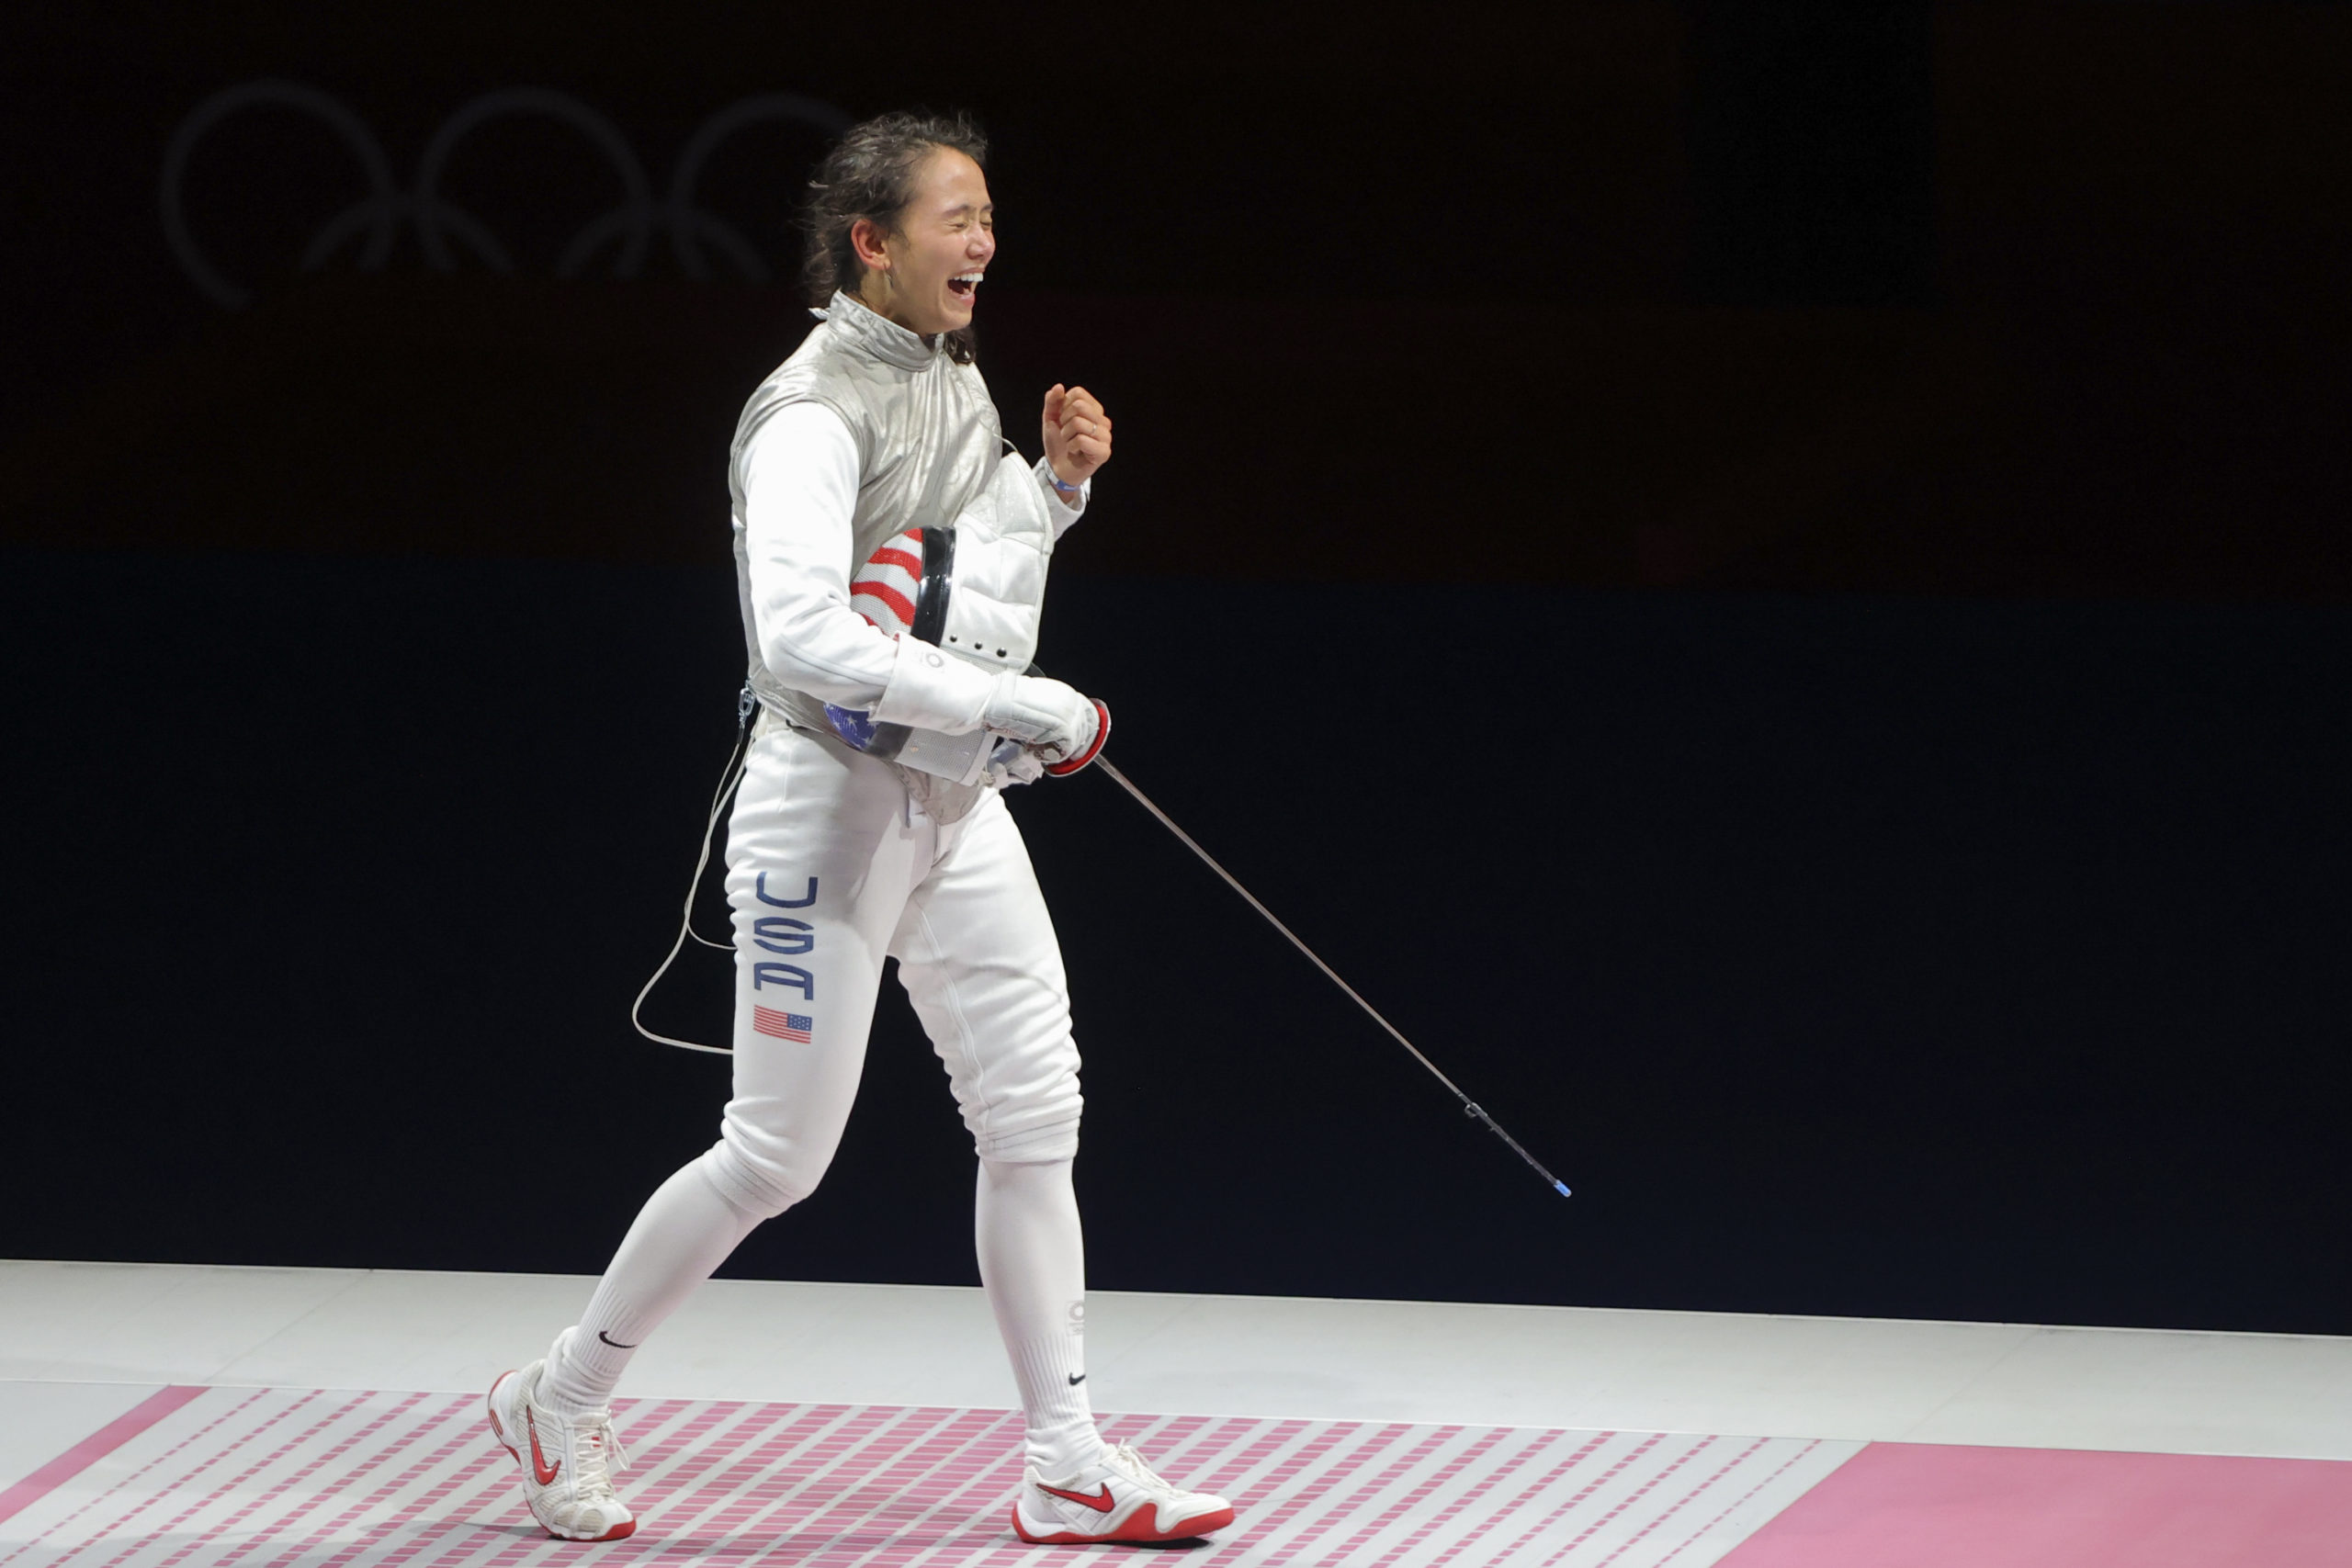 US fencer Lee Kiefer wins gold in women's foil individual Inquirer Sports